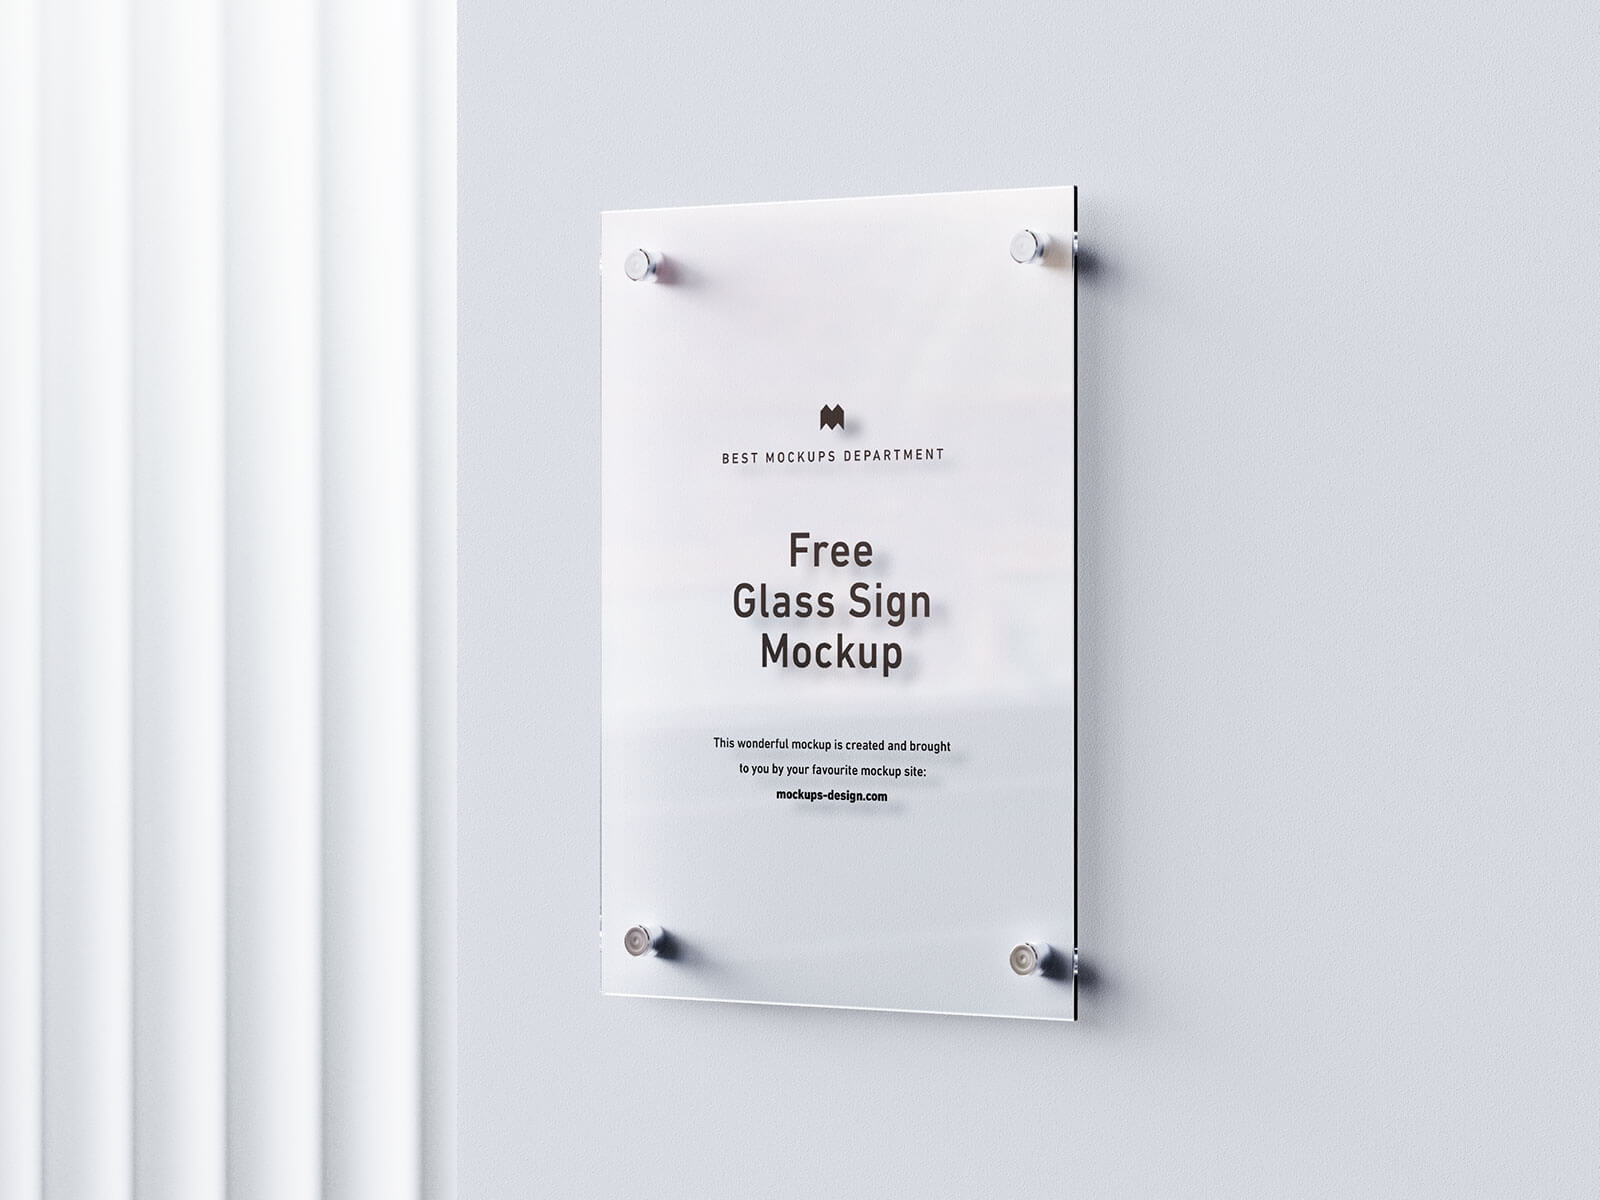 Free Wall Mounted Etched Glass Sign Mockup PSD Set